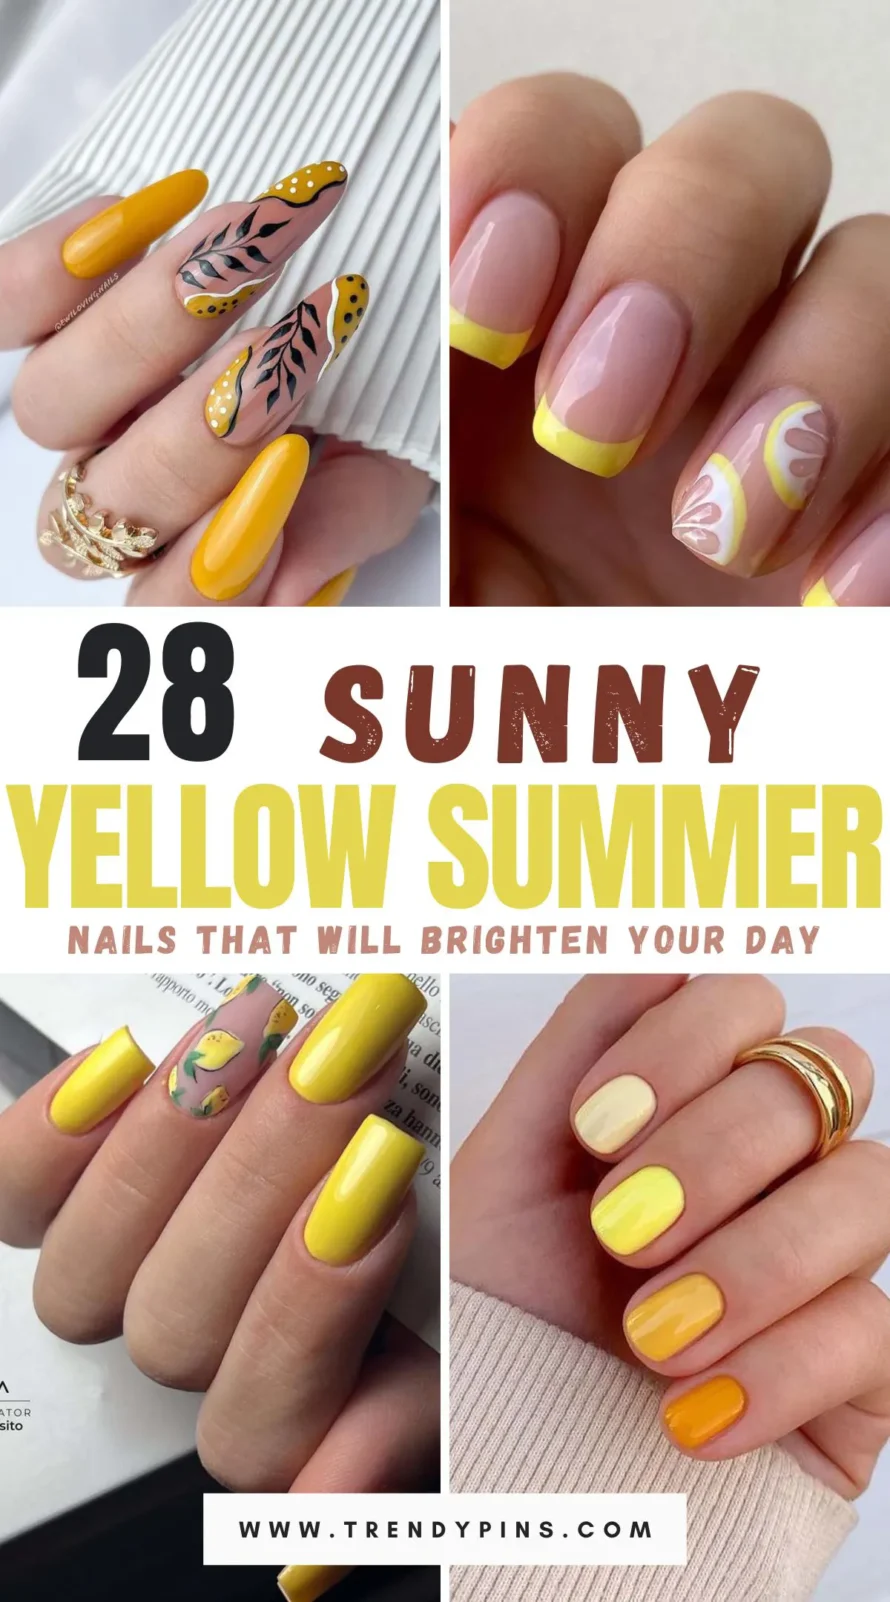 Discover 28 vibrant yellow nail designs perfect for summer to add a cheerful touch to your look.